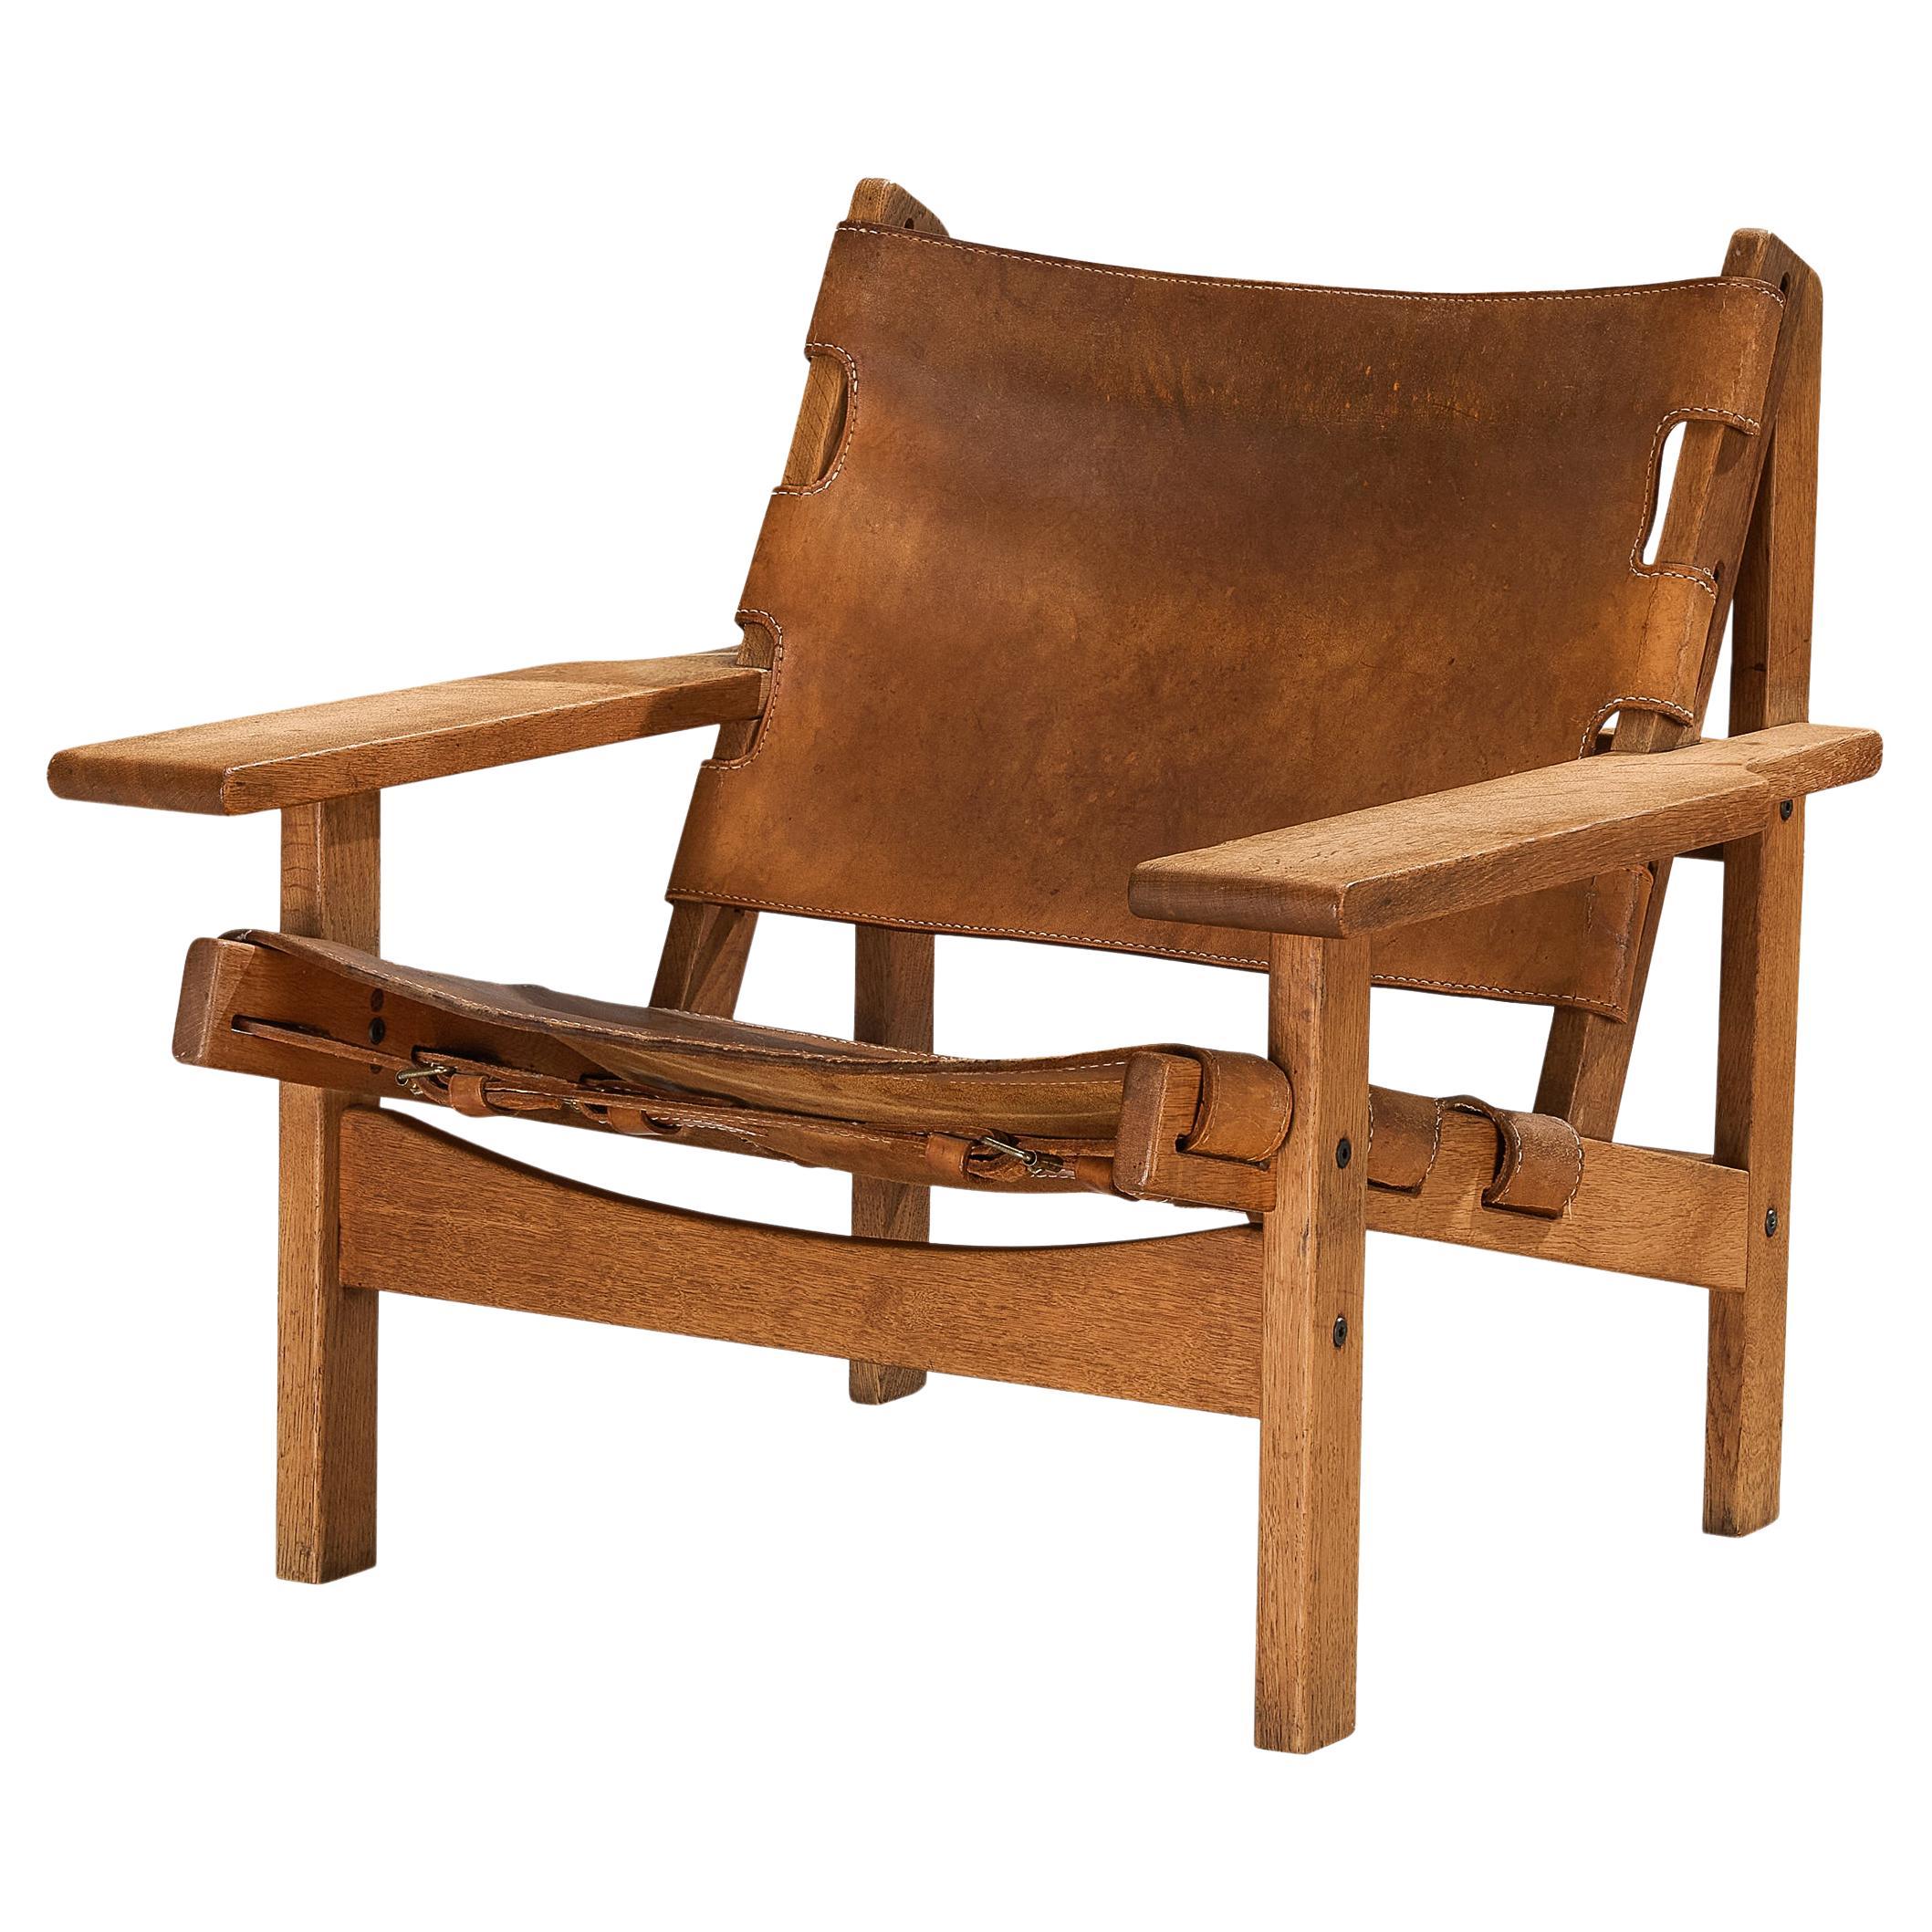  Kurt Østervig 'Hunting' Lounge Chair in Cognac Leather and Oak 